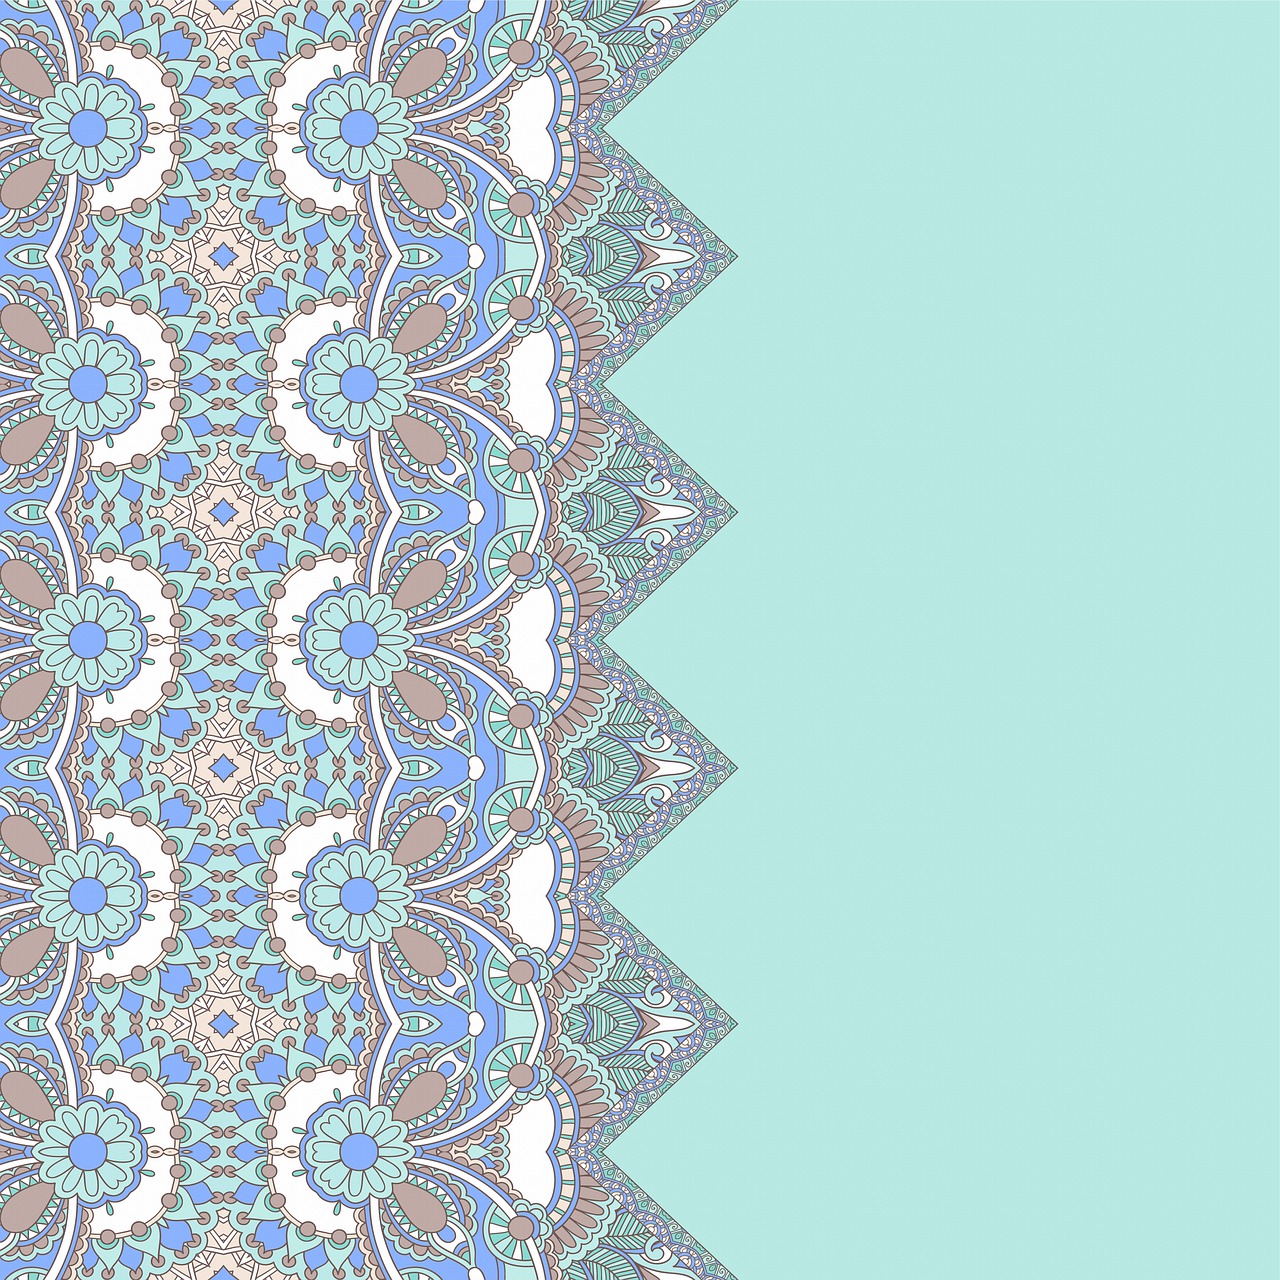 a close up of a pattern on a blue background, arabesque, pastel colours overlap, intricate border, peppermint motif, add a glow around subj. edge